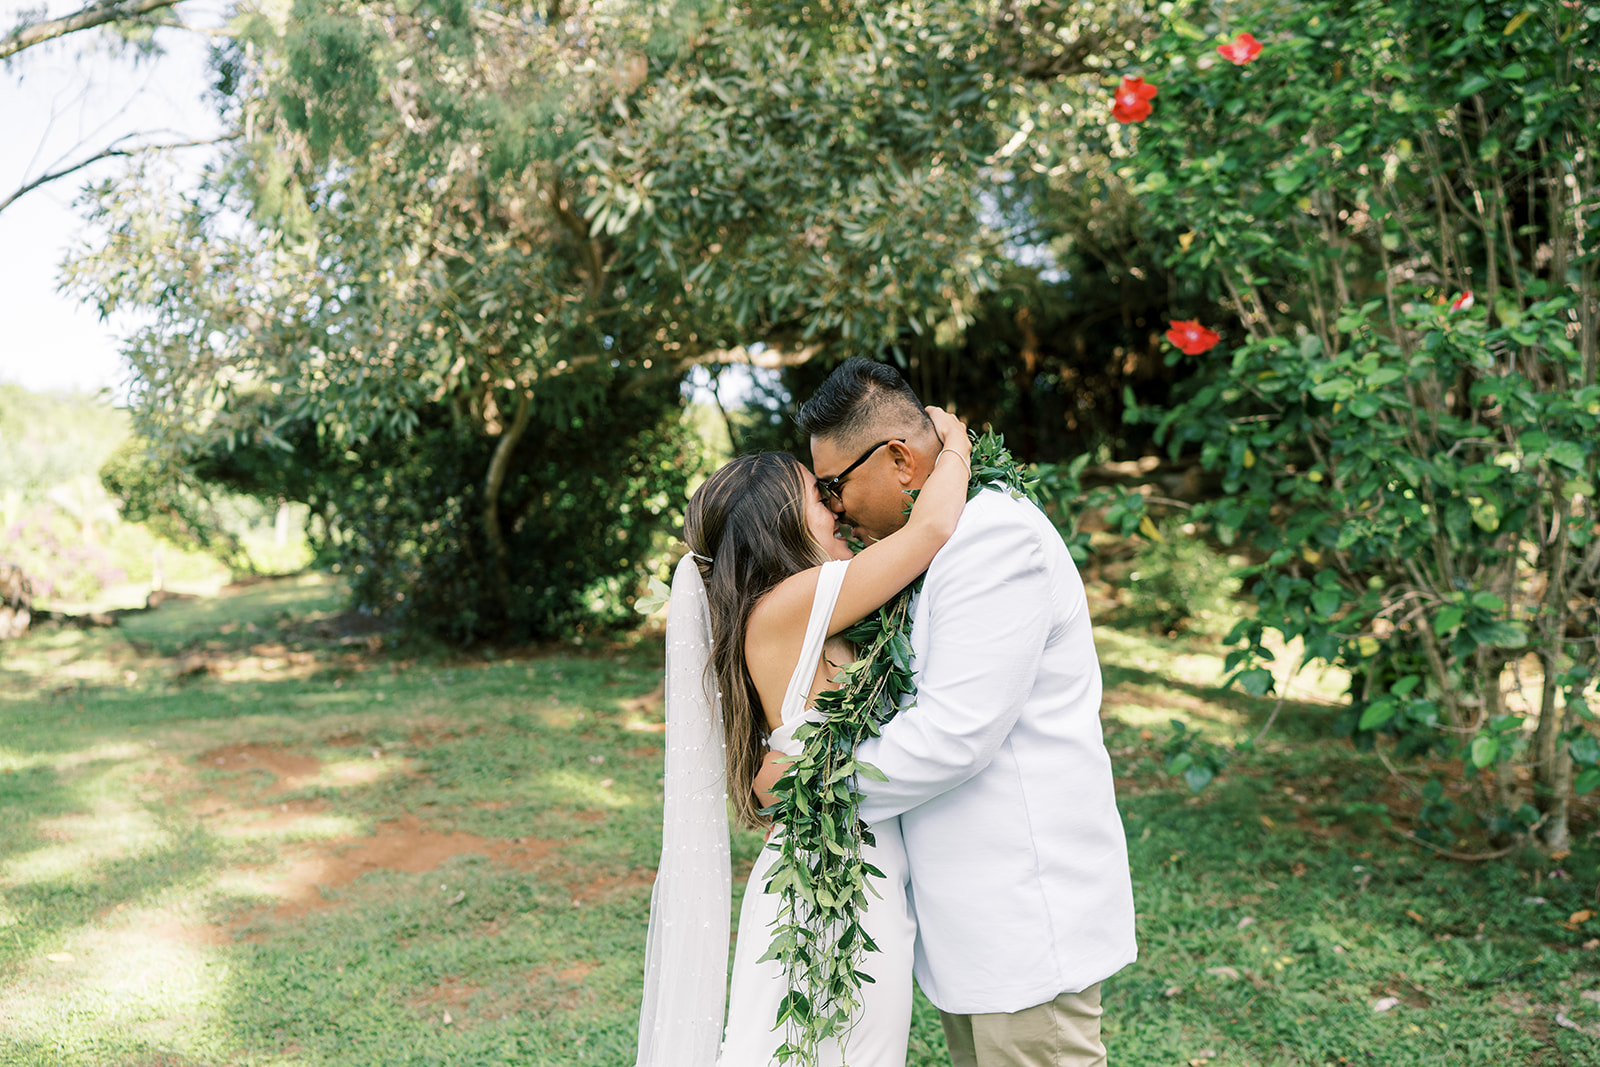 A couple embracing in nature, surrounded by greenery, captured by Megan Moura Wedding Photographer